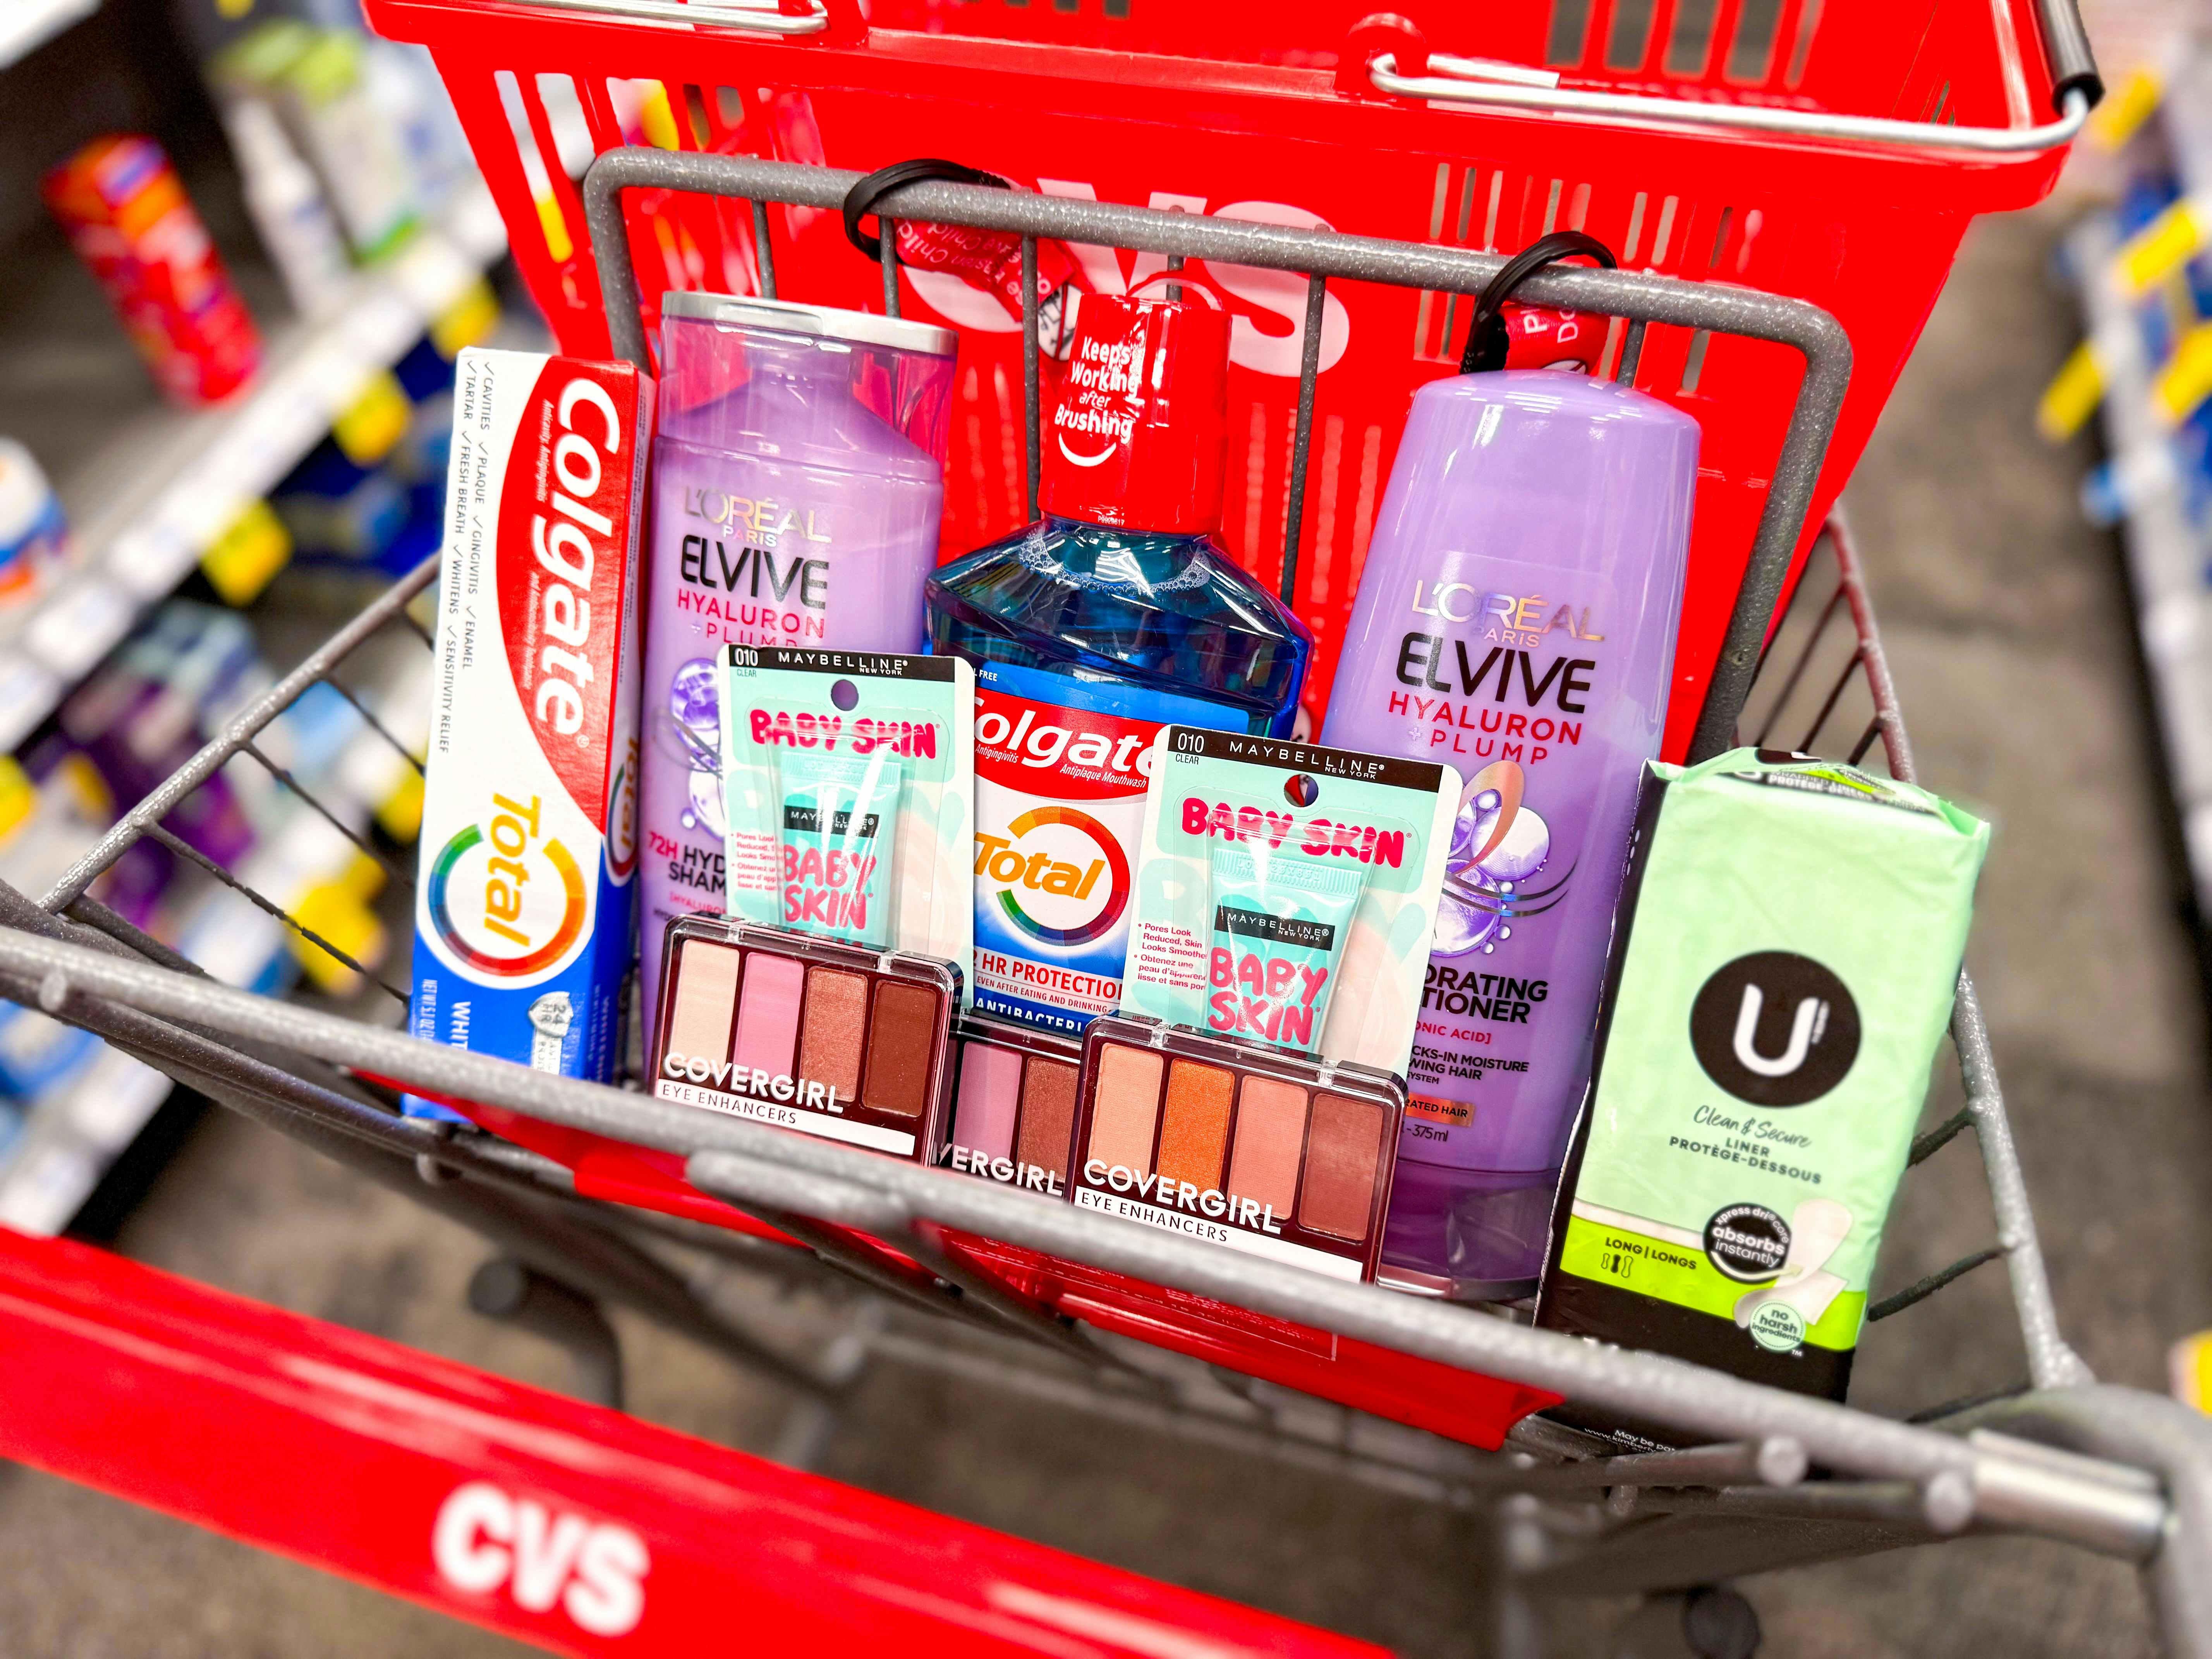 Score 11 Freebies With This $3.63 Moneymaker Shopping Haul at CVS